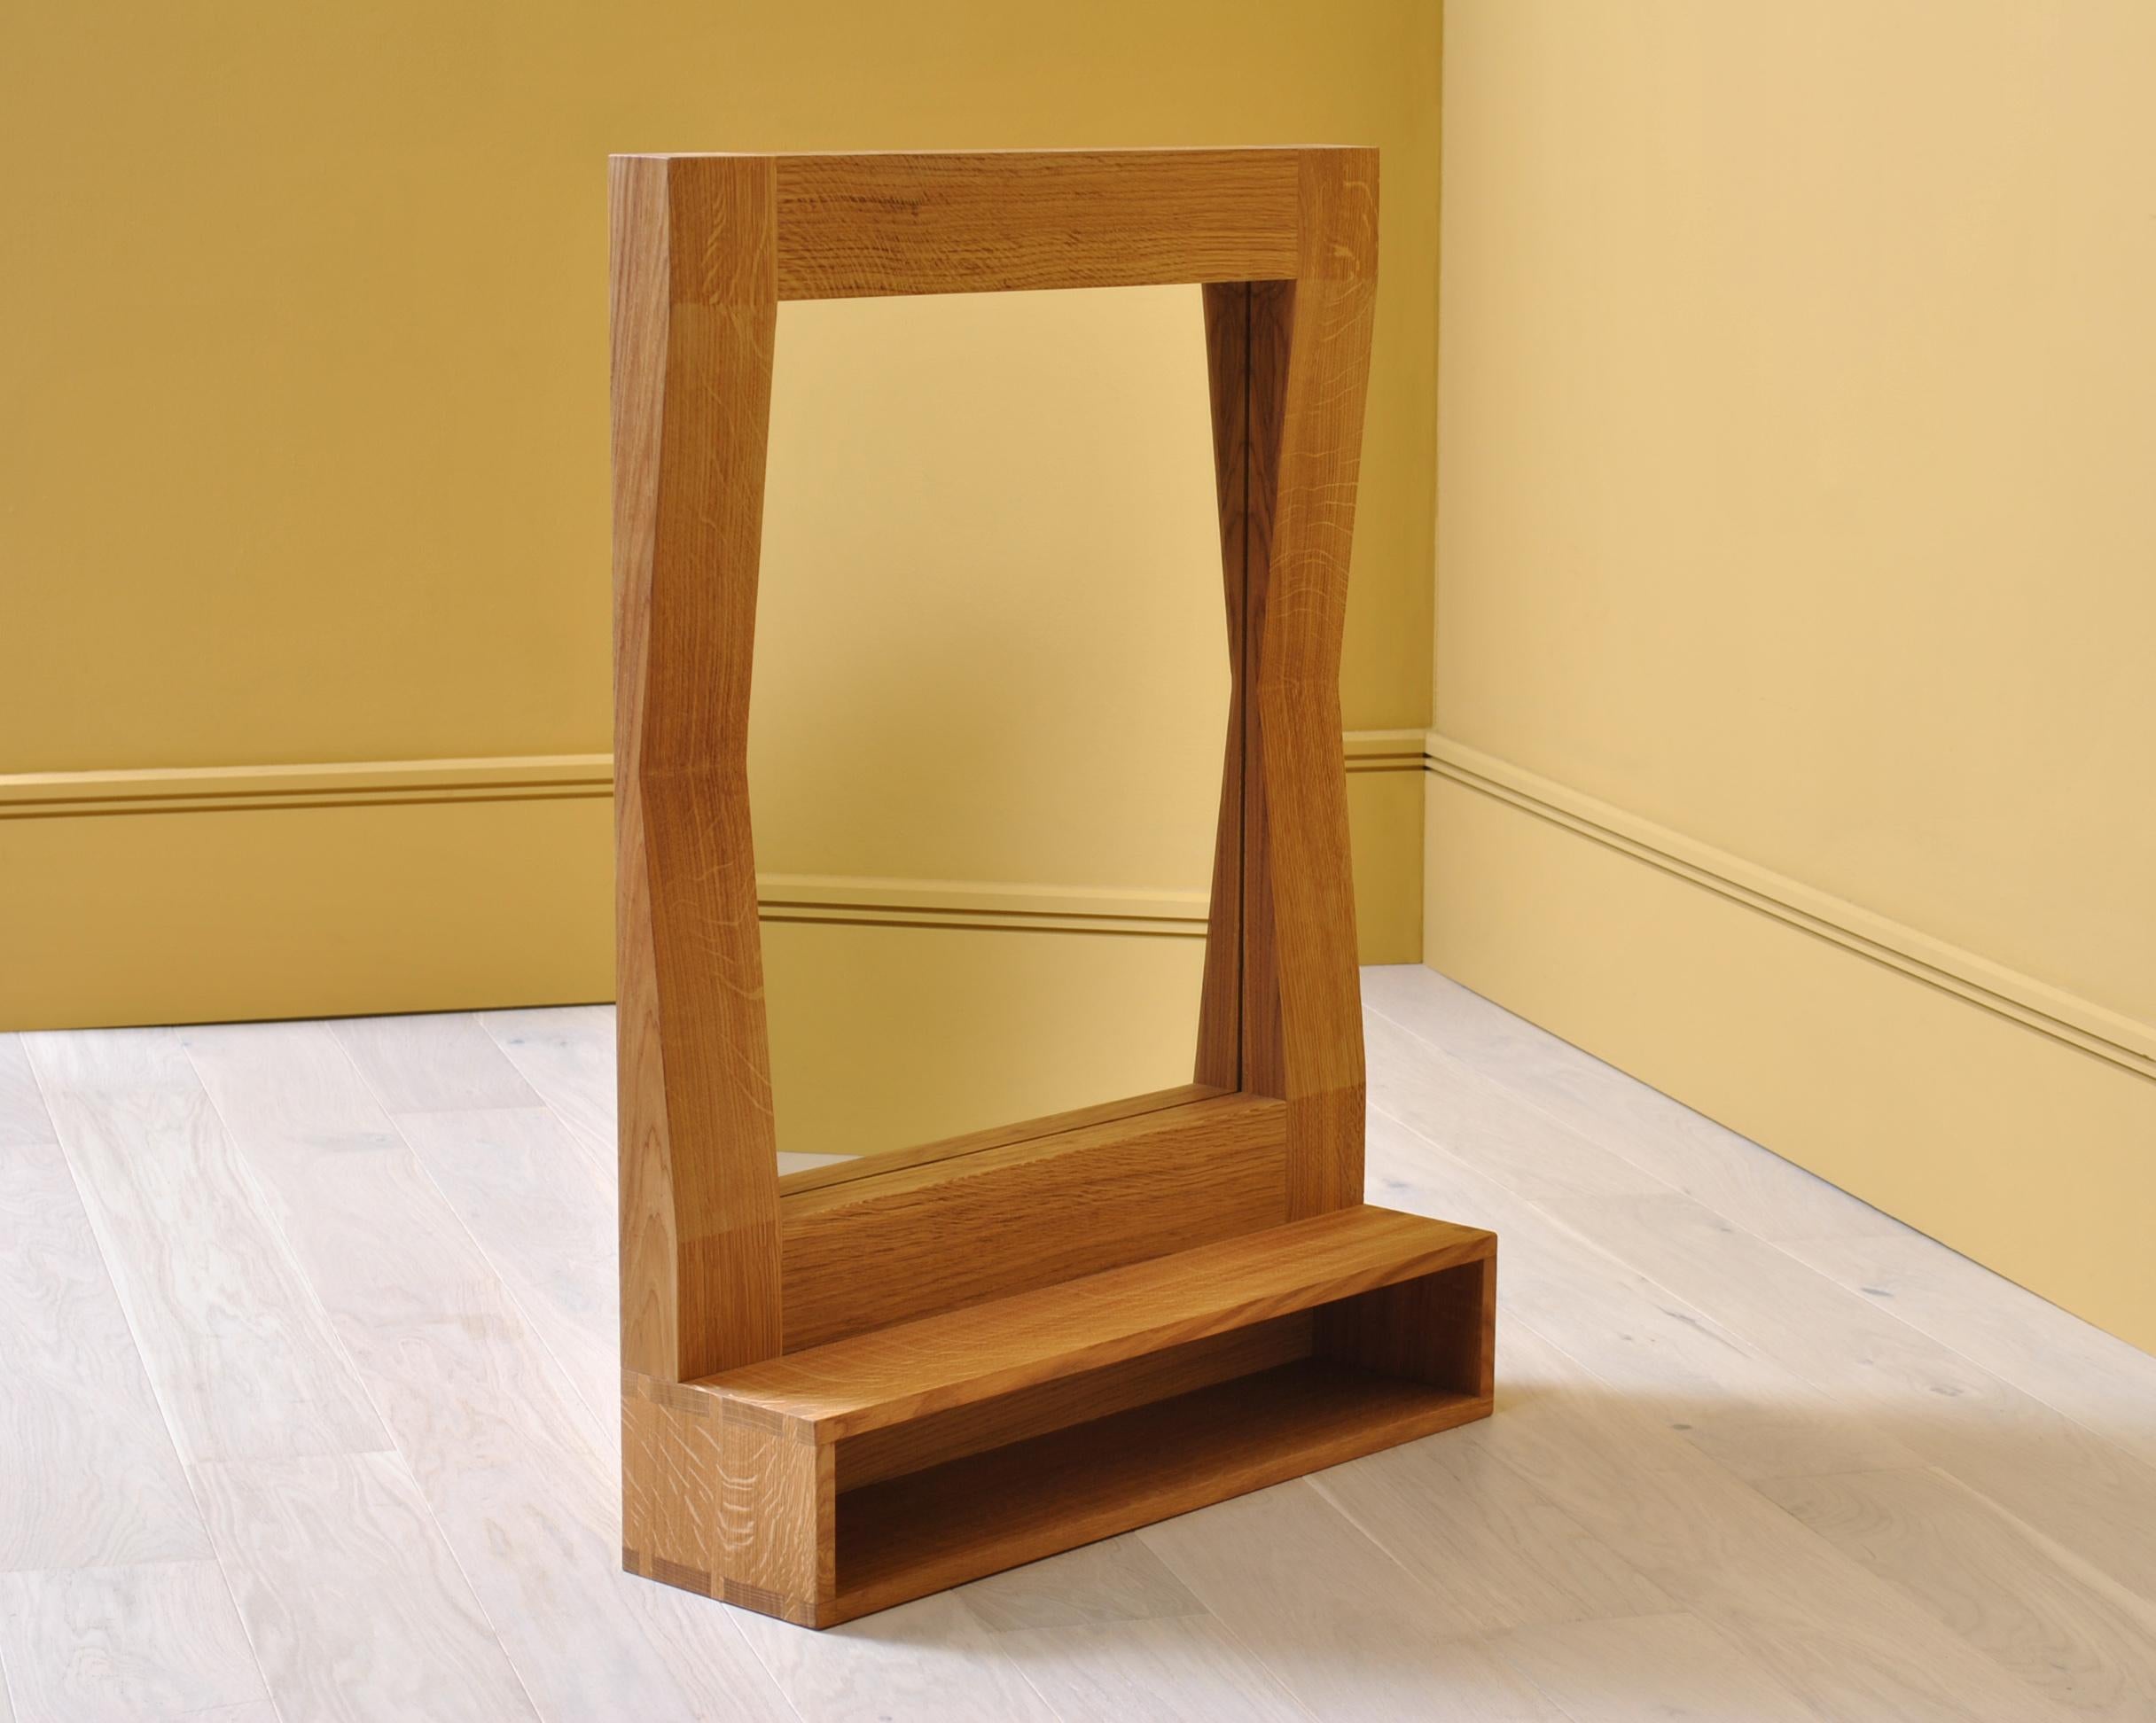 Large handcrafted ‘furrow’ oak framed mirror with shelf. Designed by SUM furniture and handcrafted in finest fully quartersawn English oak. Hand finished in natural oils. The furrow mirror creates a striking presence and gives the illusion of it